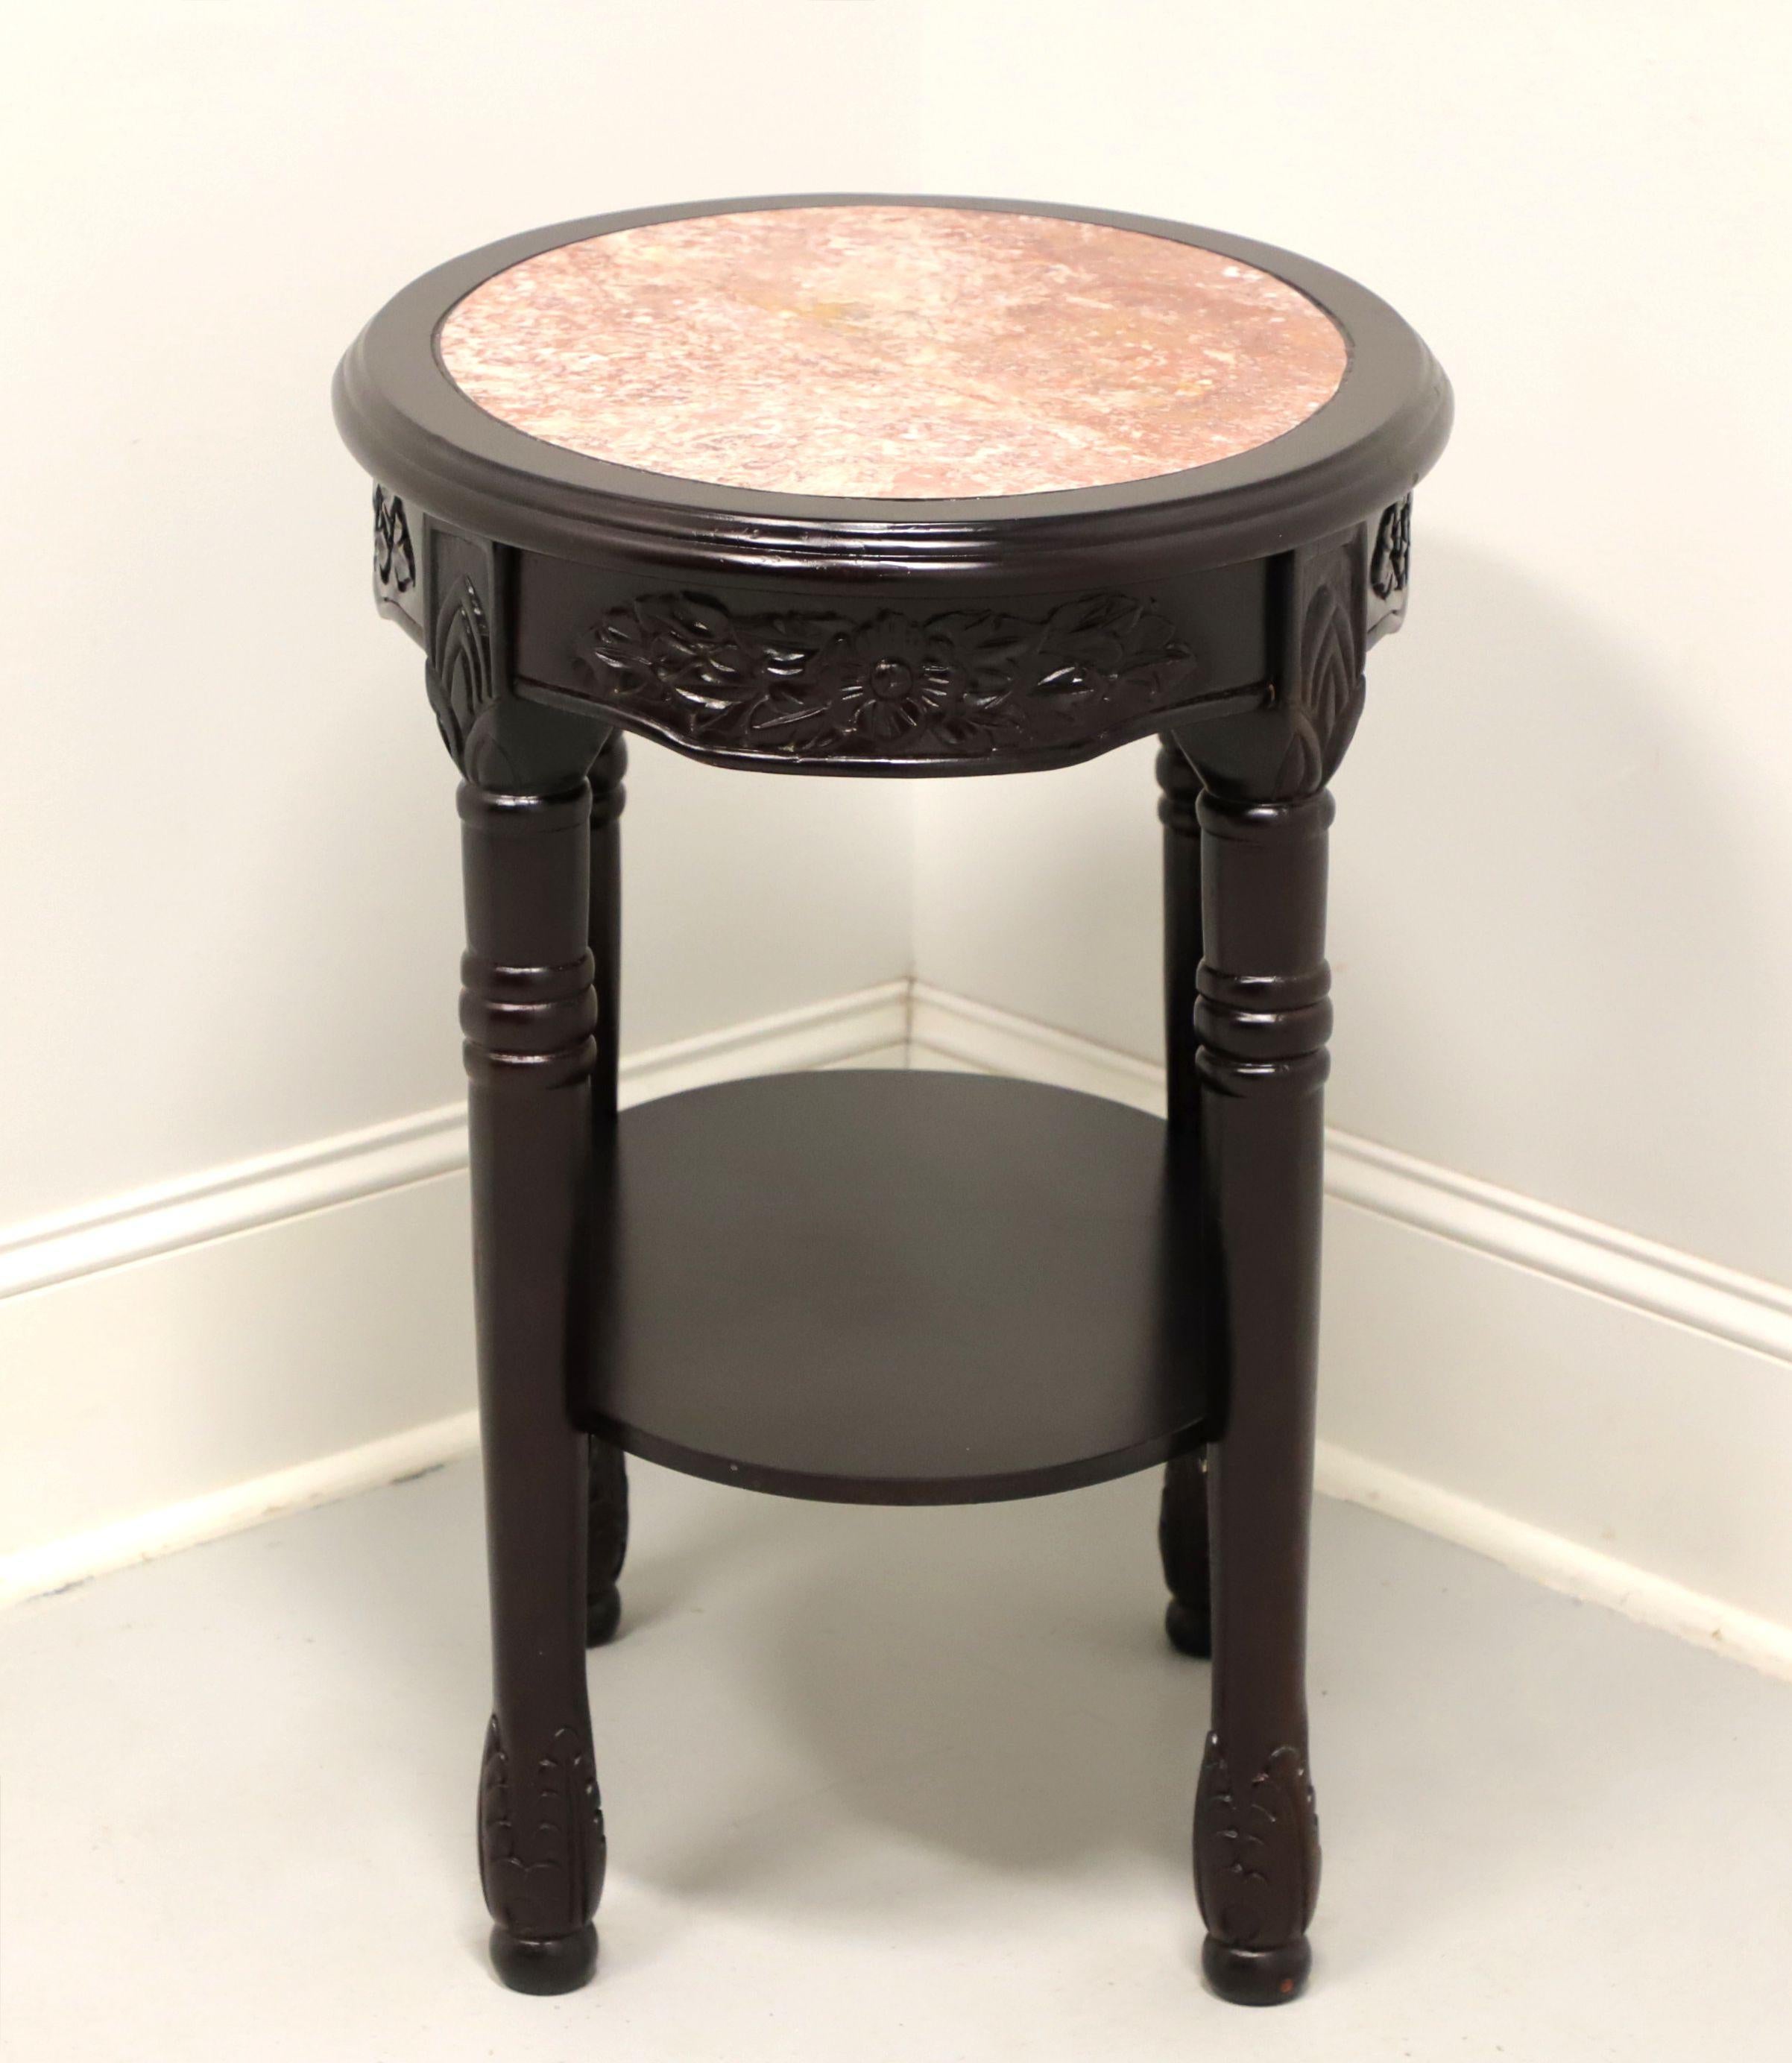 Antique Rosewood Finish Victorian Oval Marble Top Occasional Table - B In Good Condition For Sale In Charlotte, NC